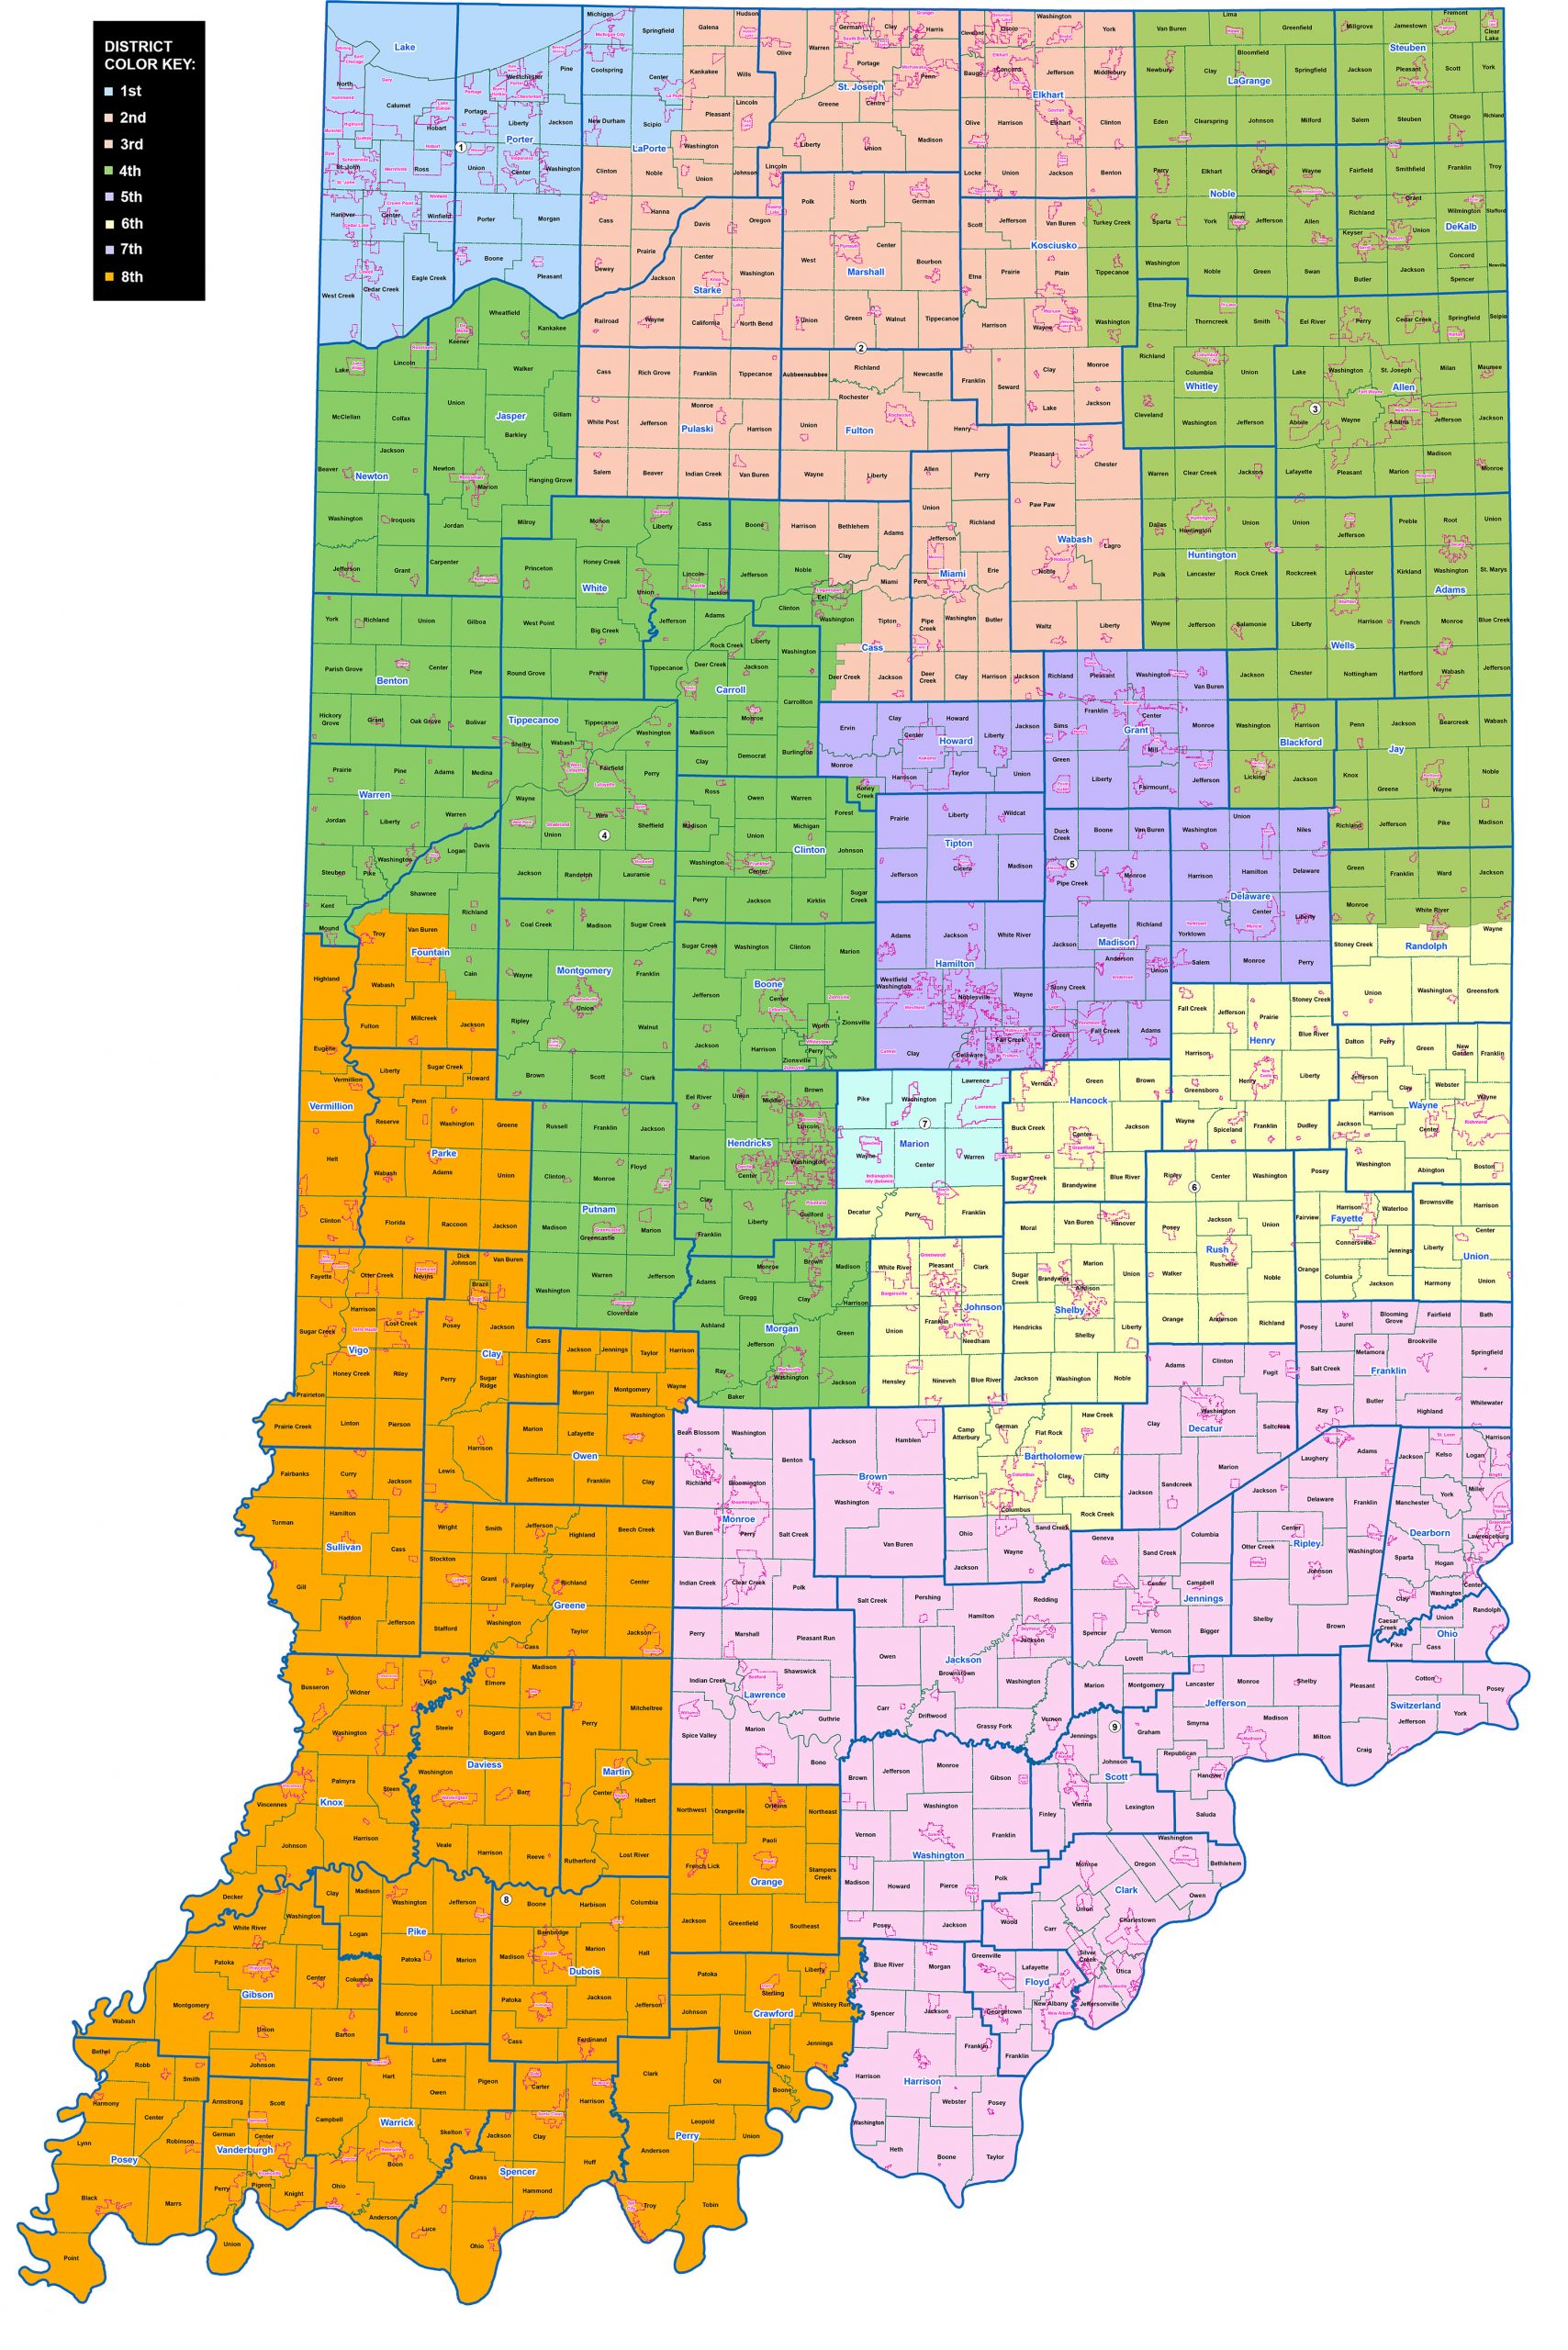 Indiana Congressional Districts Draft Map Sept 14 2021 Scaled 